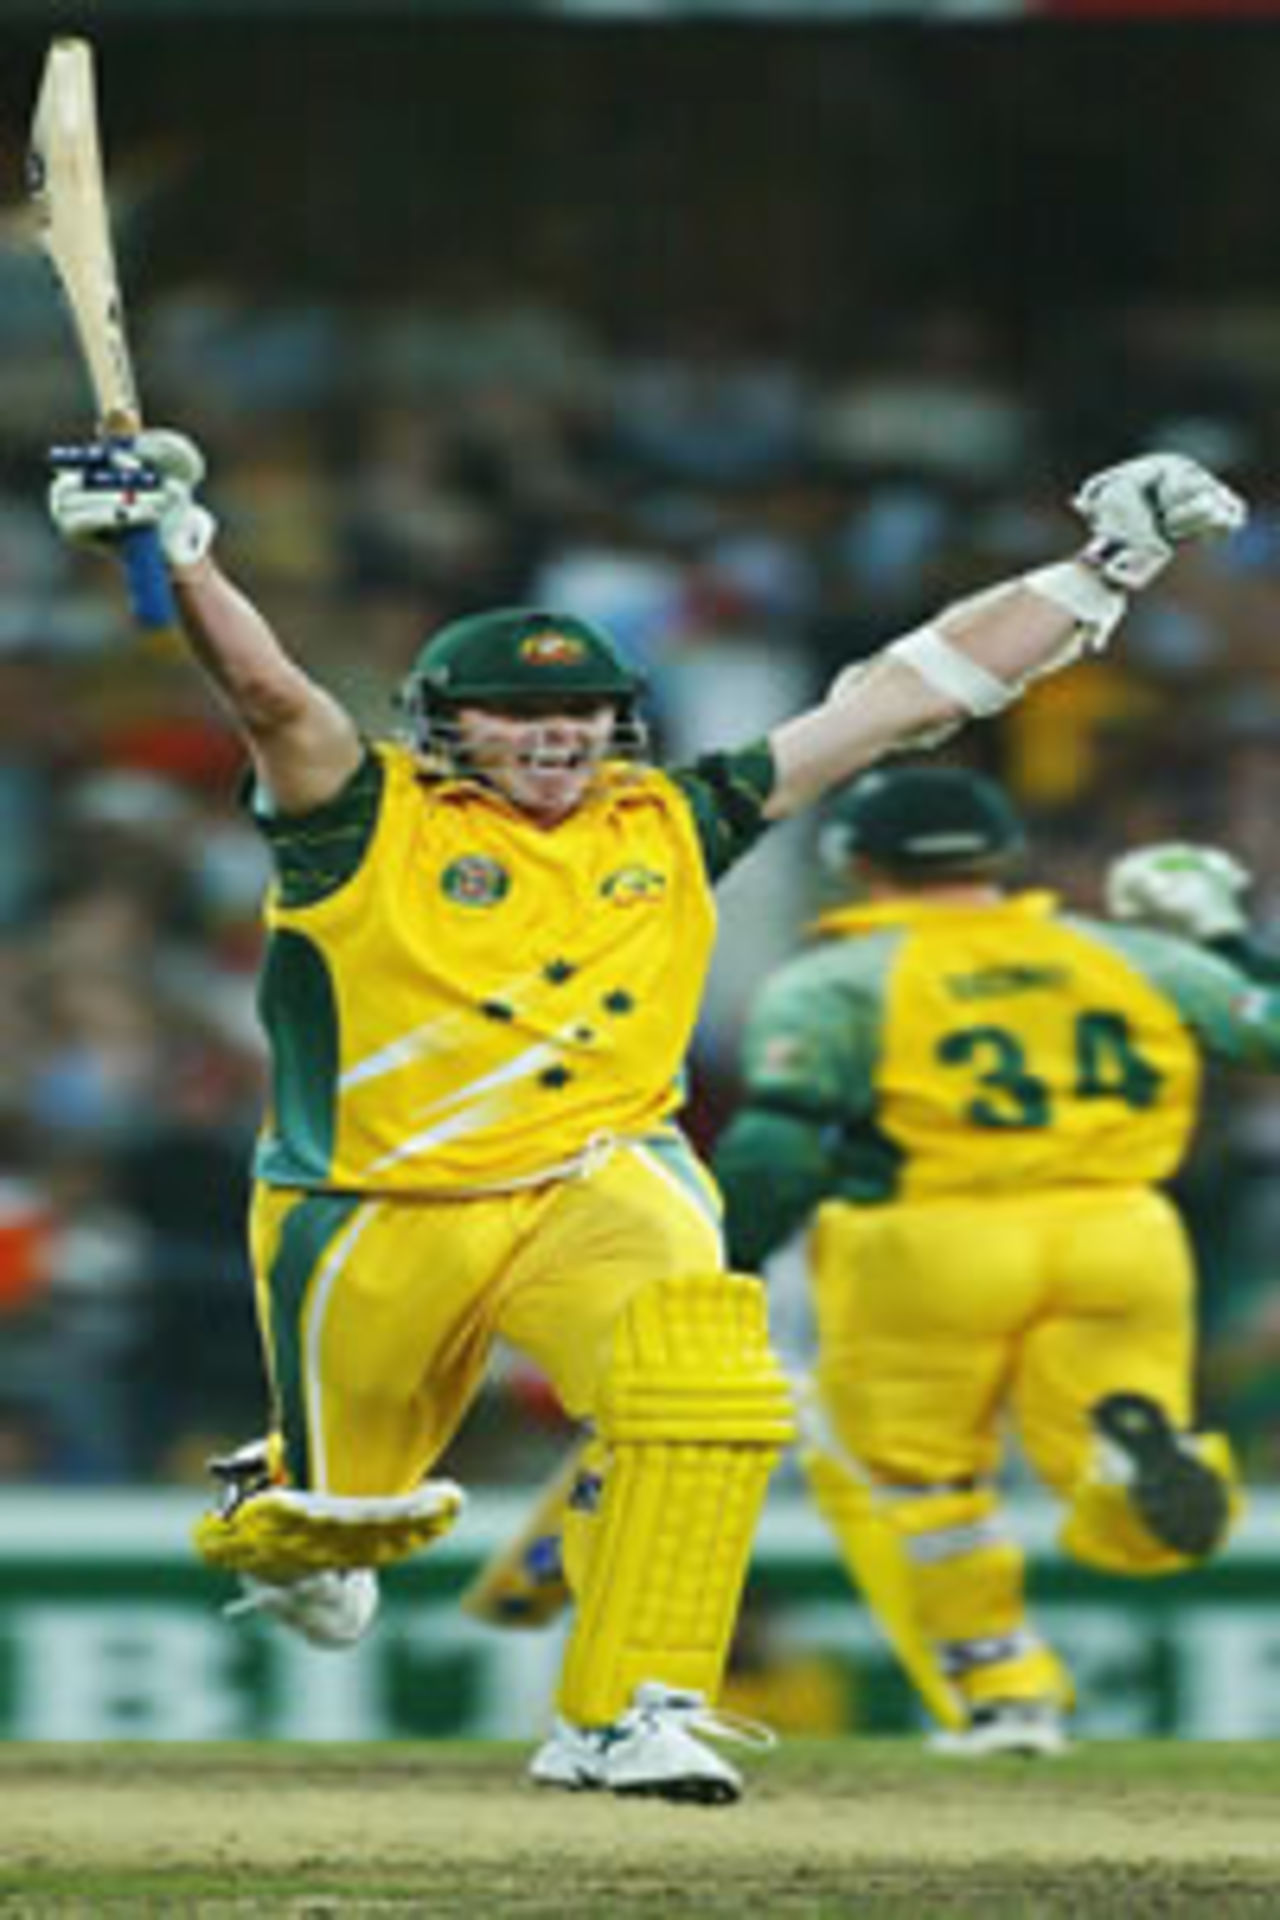 Brett Lee rescued Australia with a crucial 6 to snatch an unlikely victory